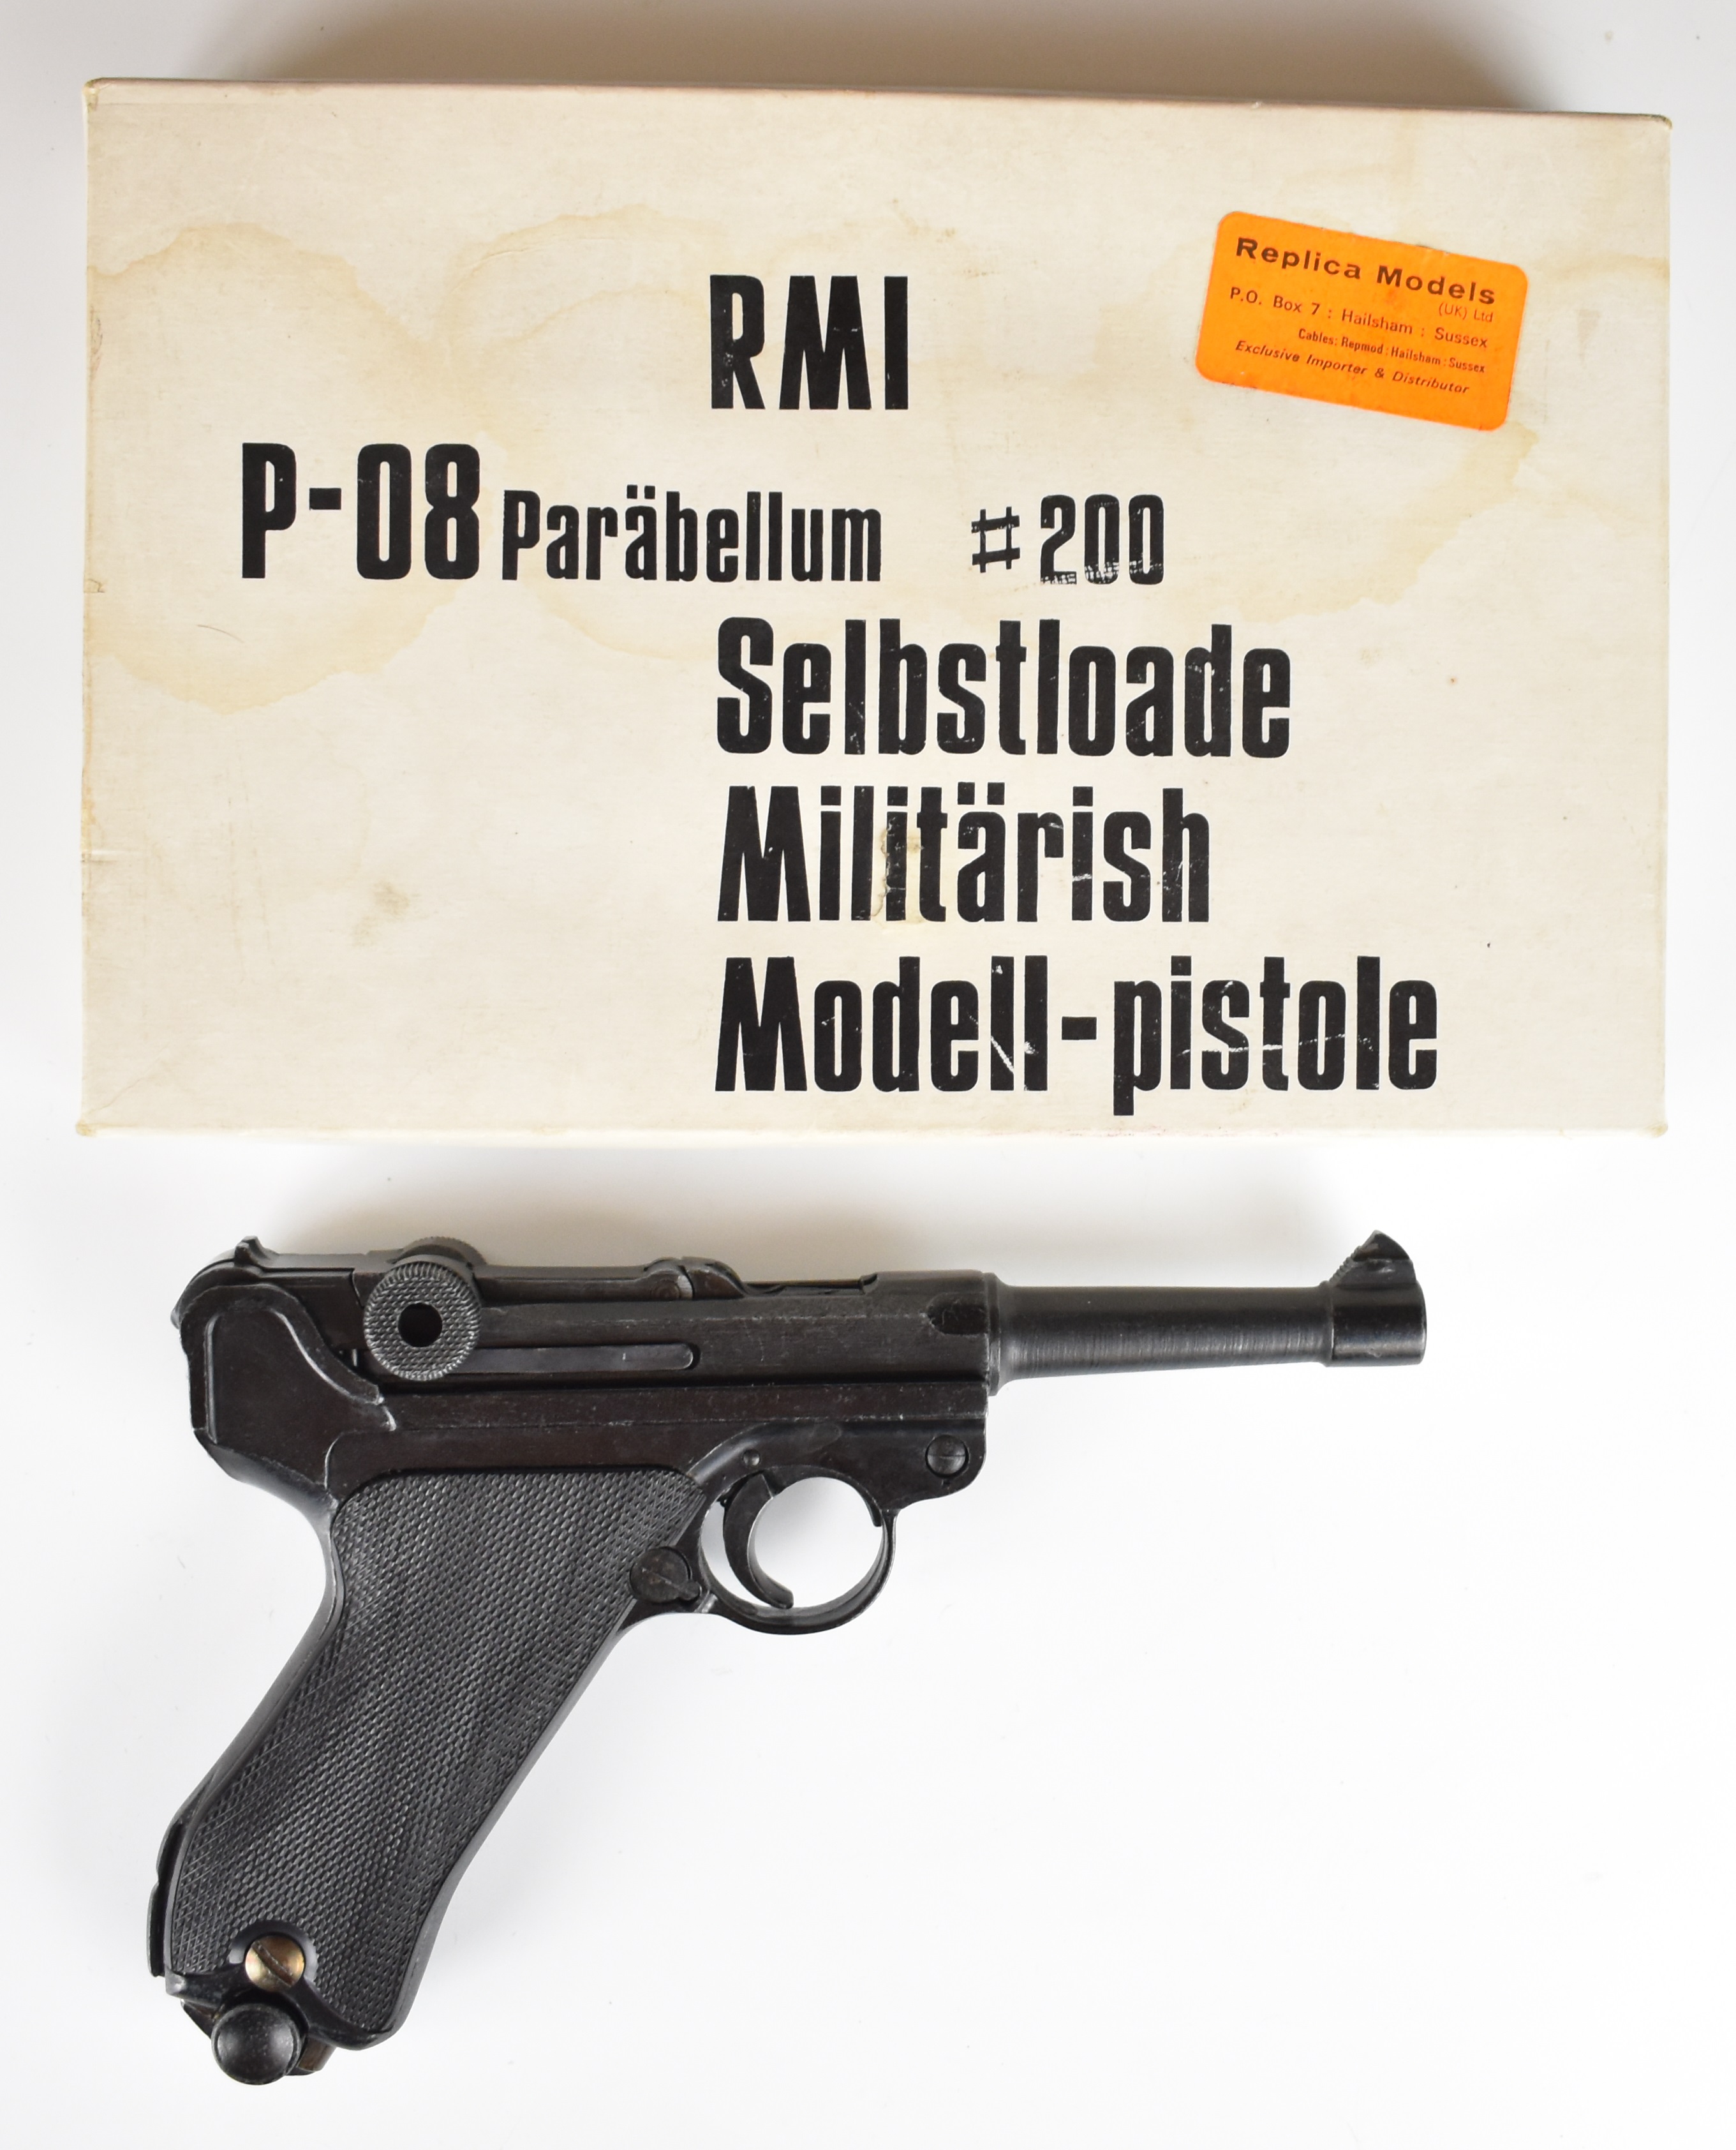 RMI P-08 Parabellum Selbstloade Militarish Luger pistol with chequered grips and dummy rounds, in